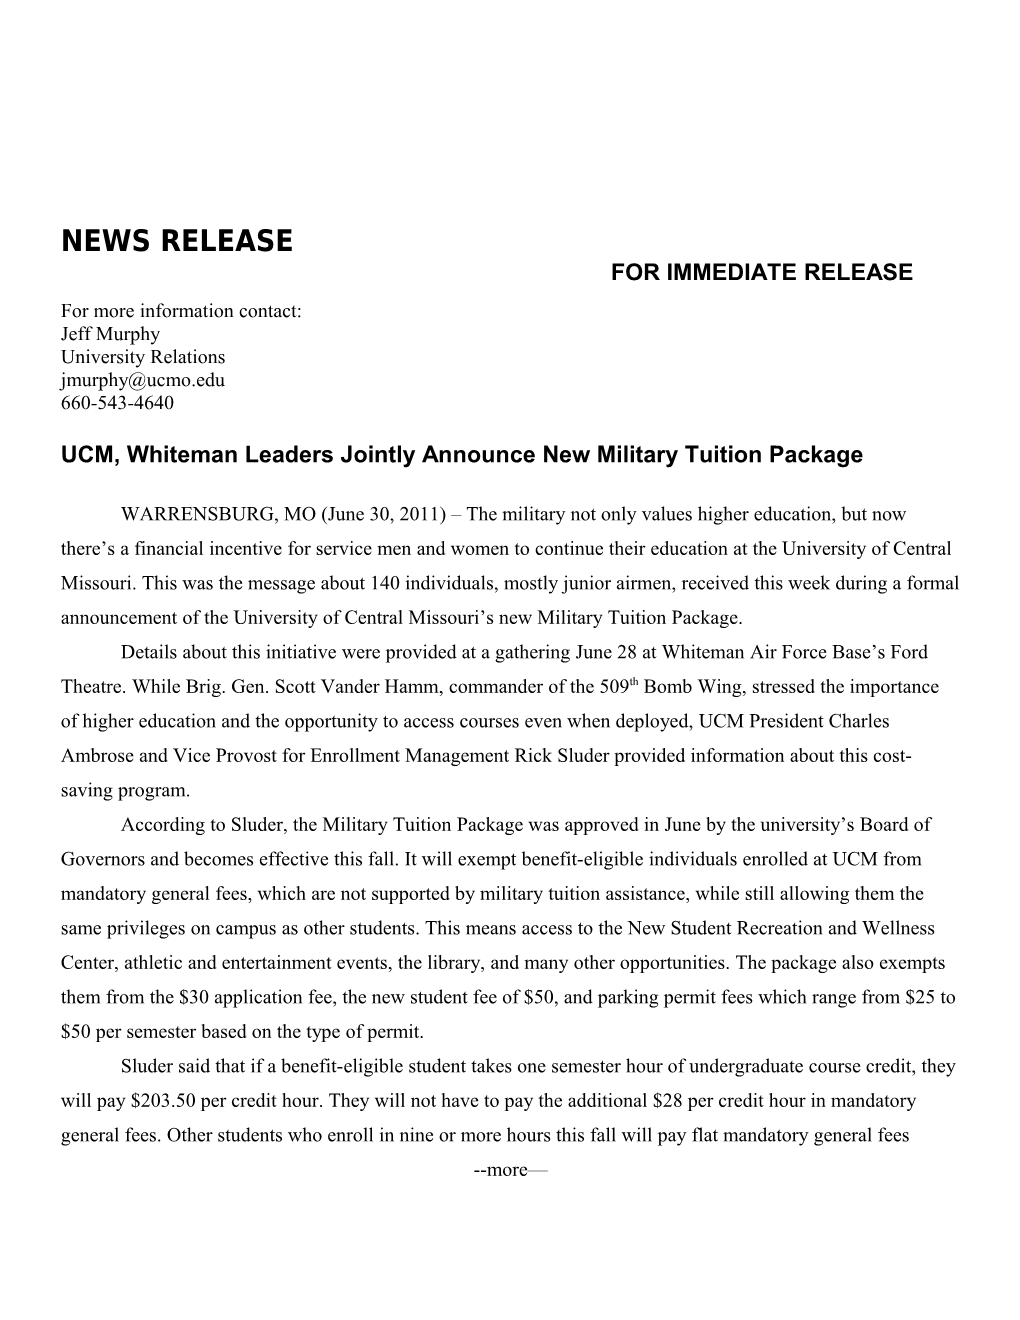 UCM, Whiteman Leaders Jointly Announce New Military Tuition Package